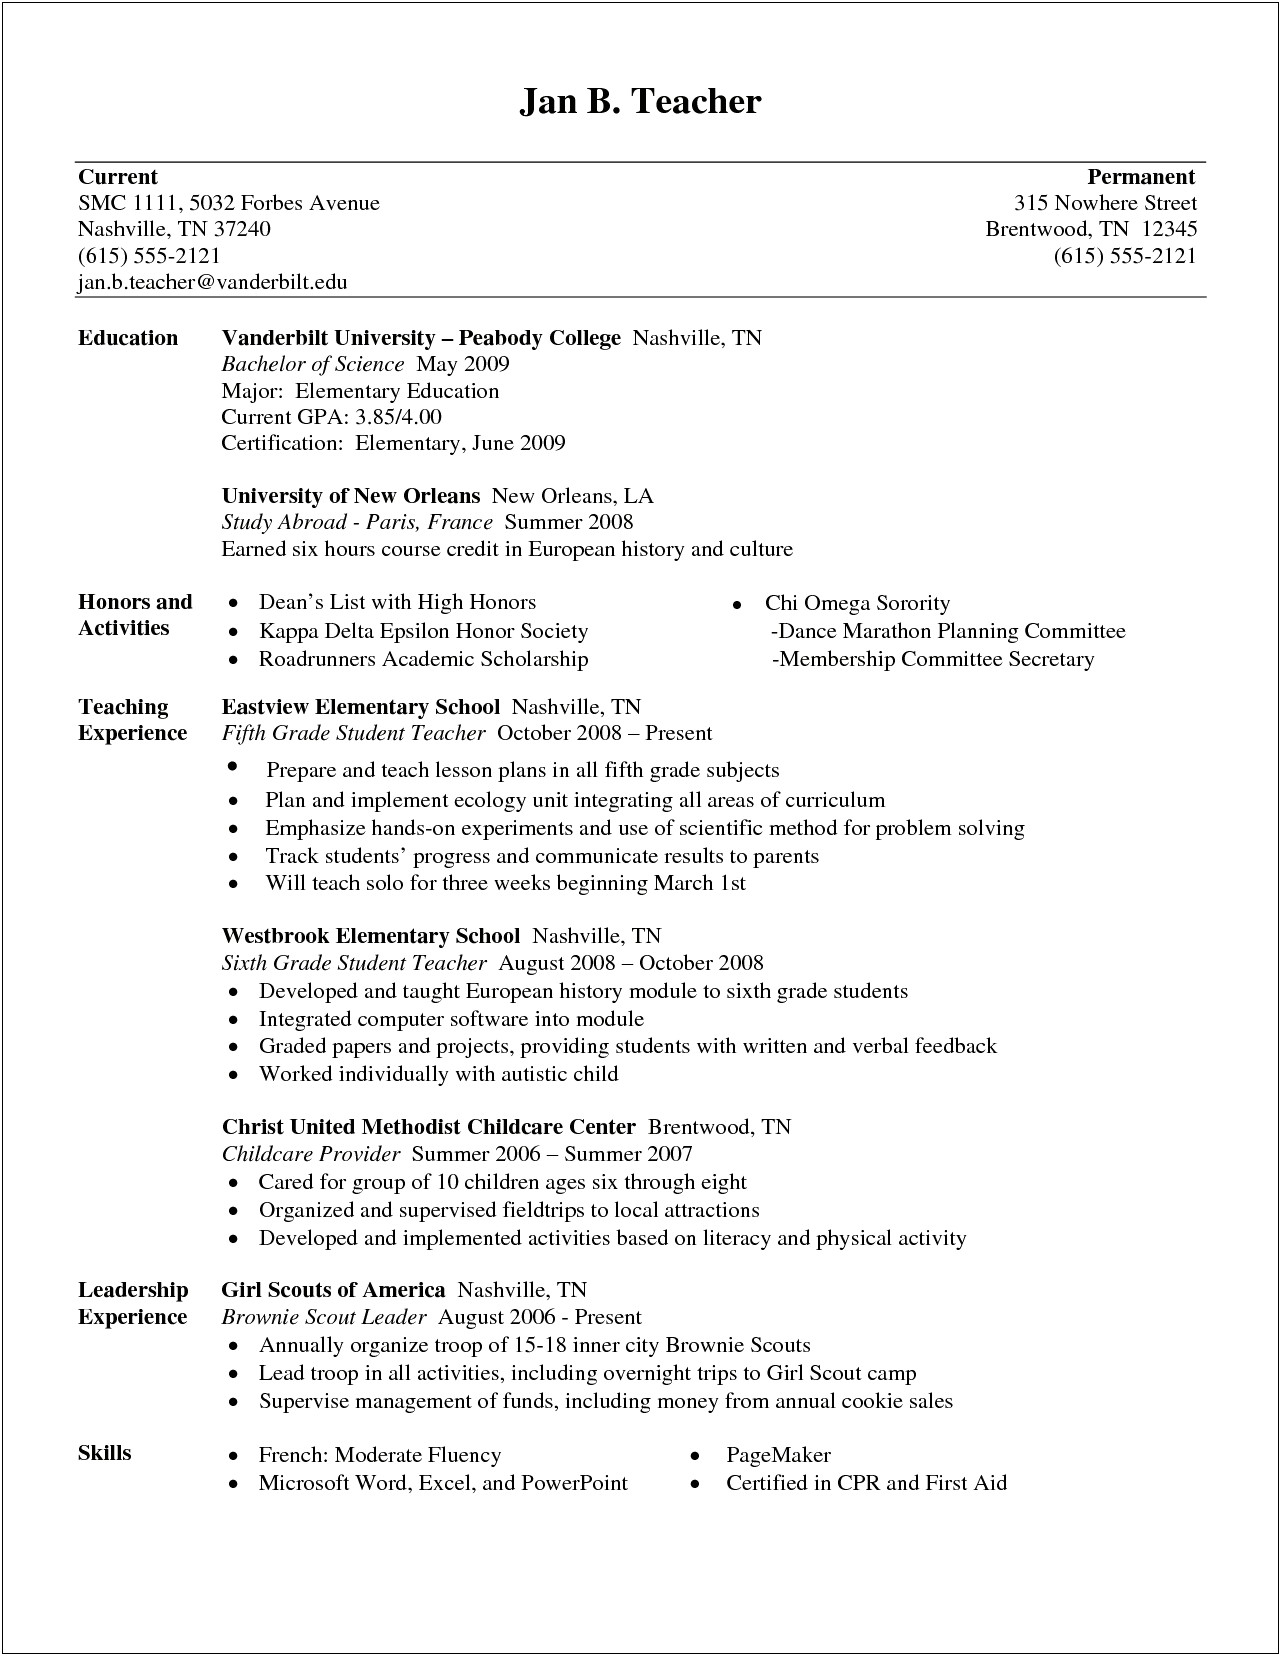 Resume Examples For Teaching English Abroad